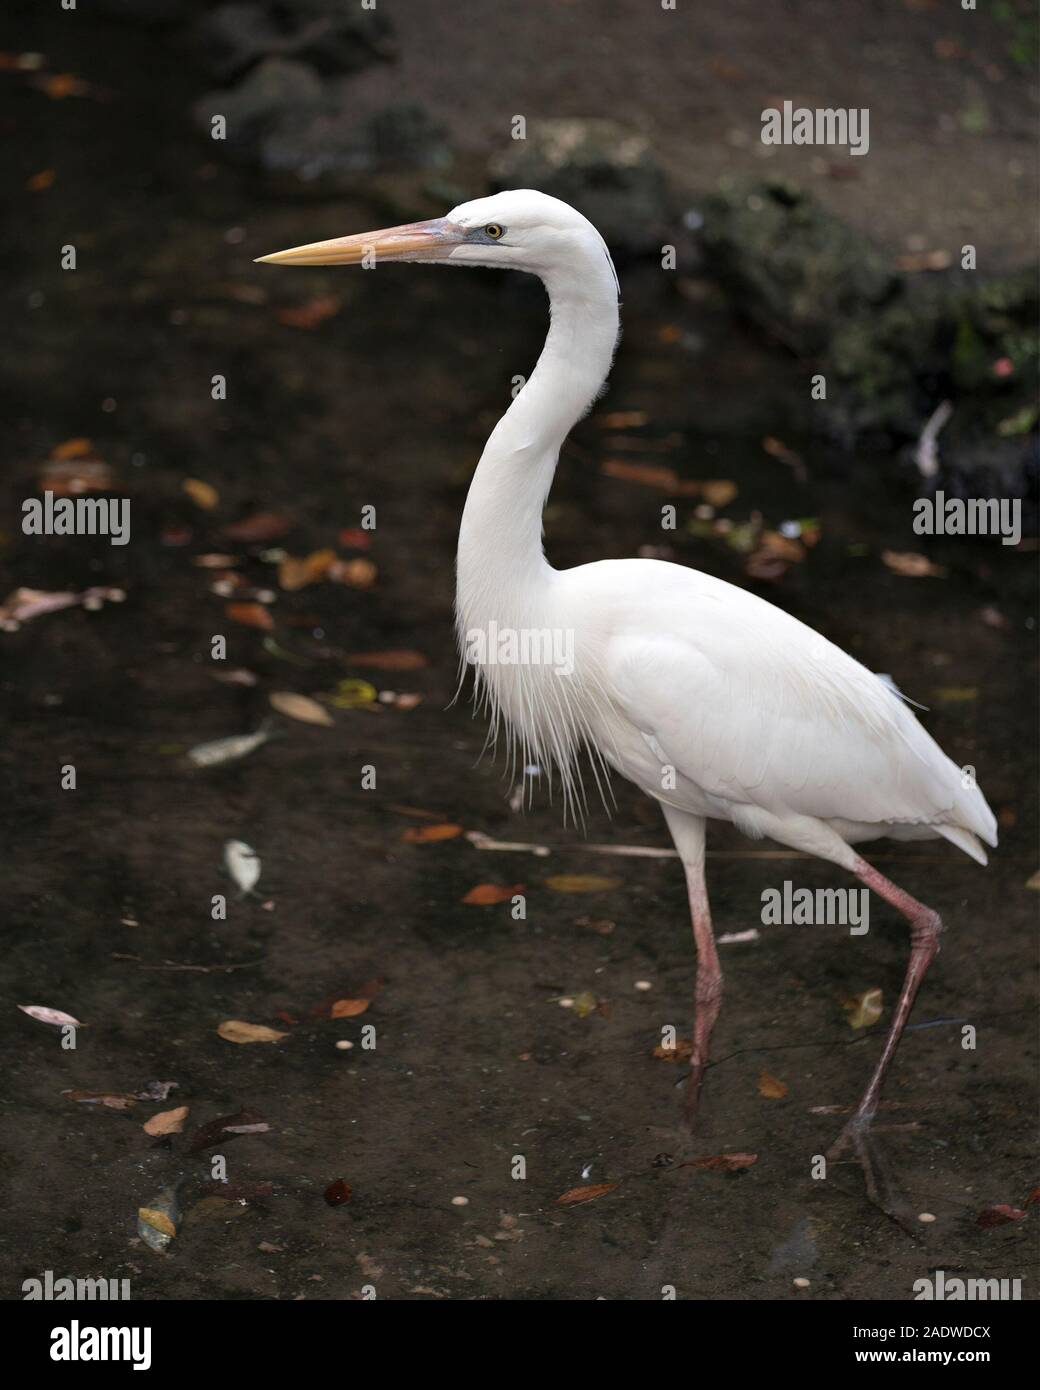 White Heron bird close-up profile view in the water displaying its body, head, eye, beak, long neck, with a black contrast background. Stock Photo